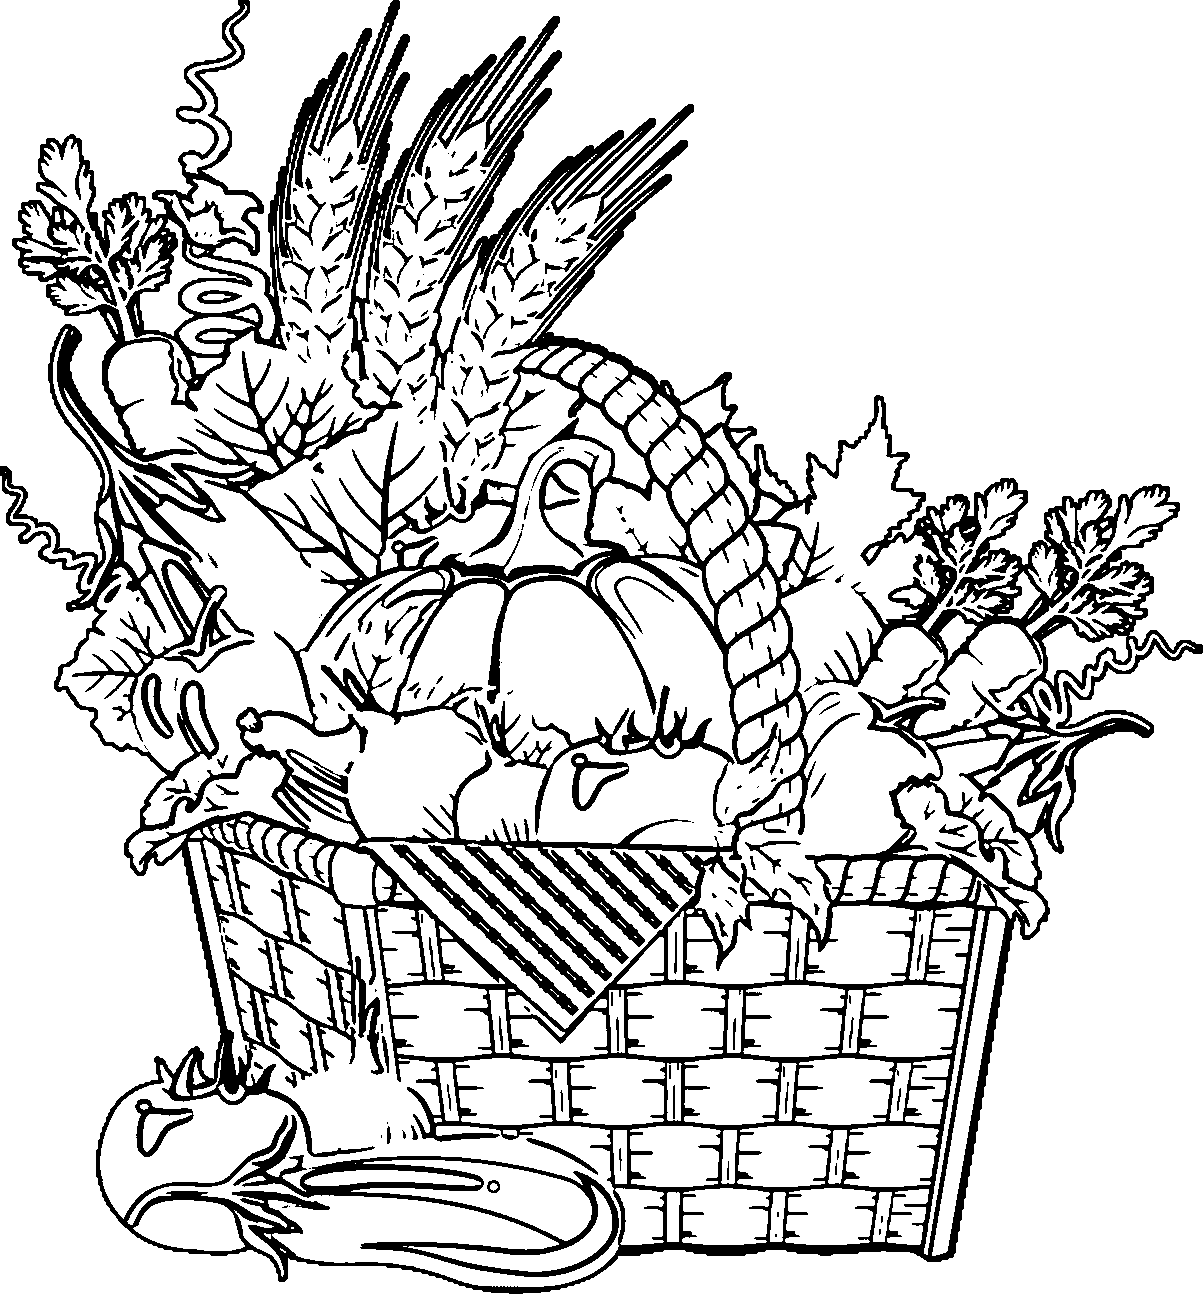 colouring pictures of vegetables vegetable coloring pages for childrens printable for free pictures colouring vegetables of 